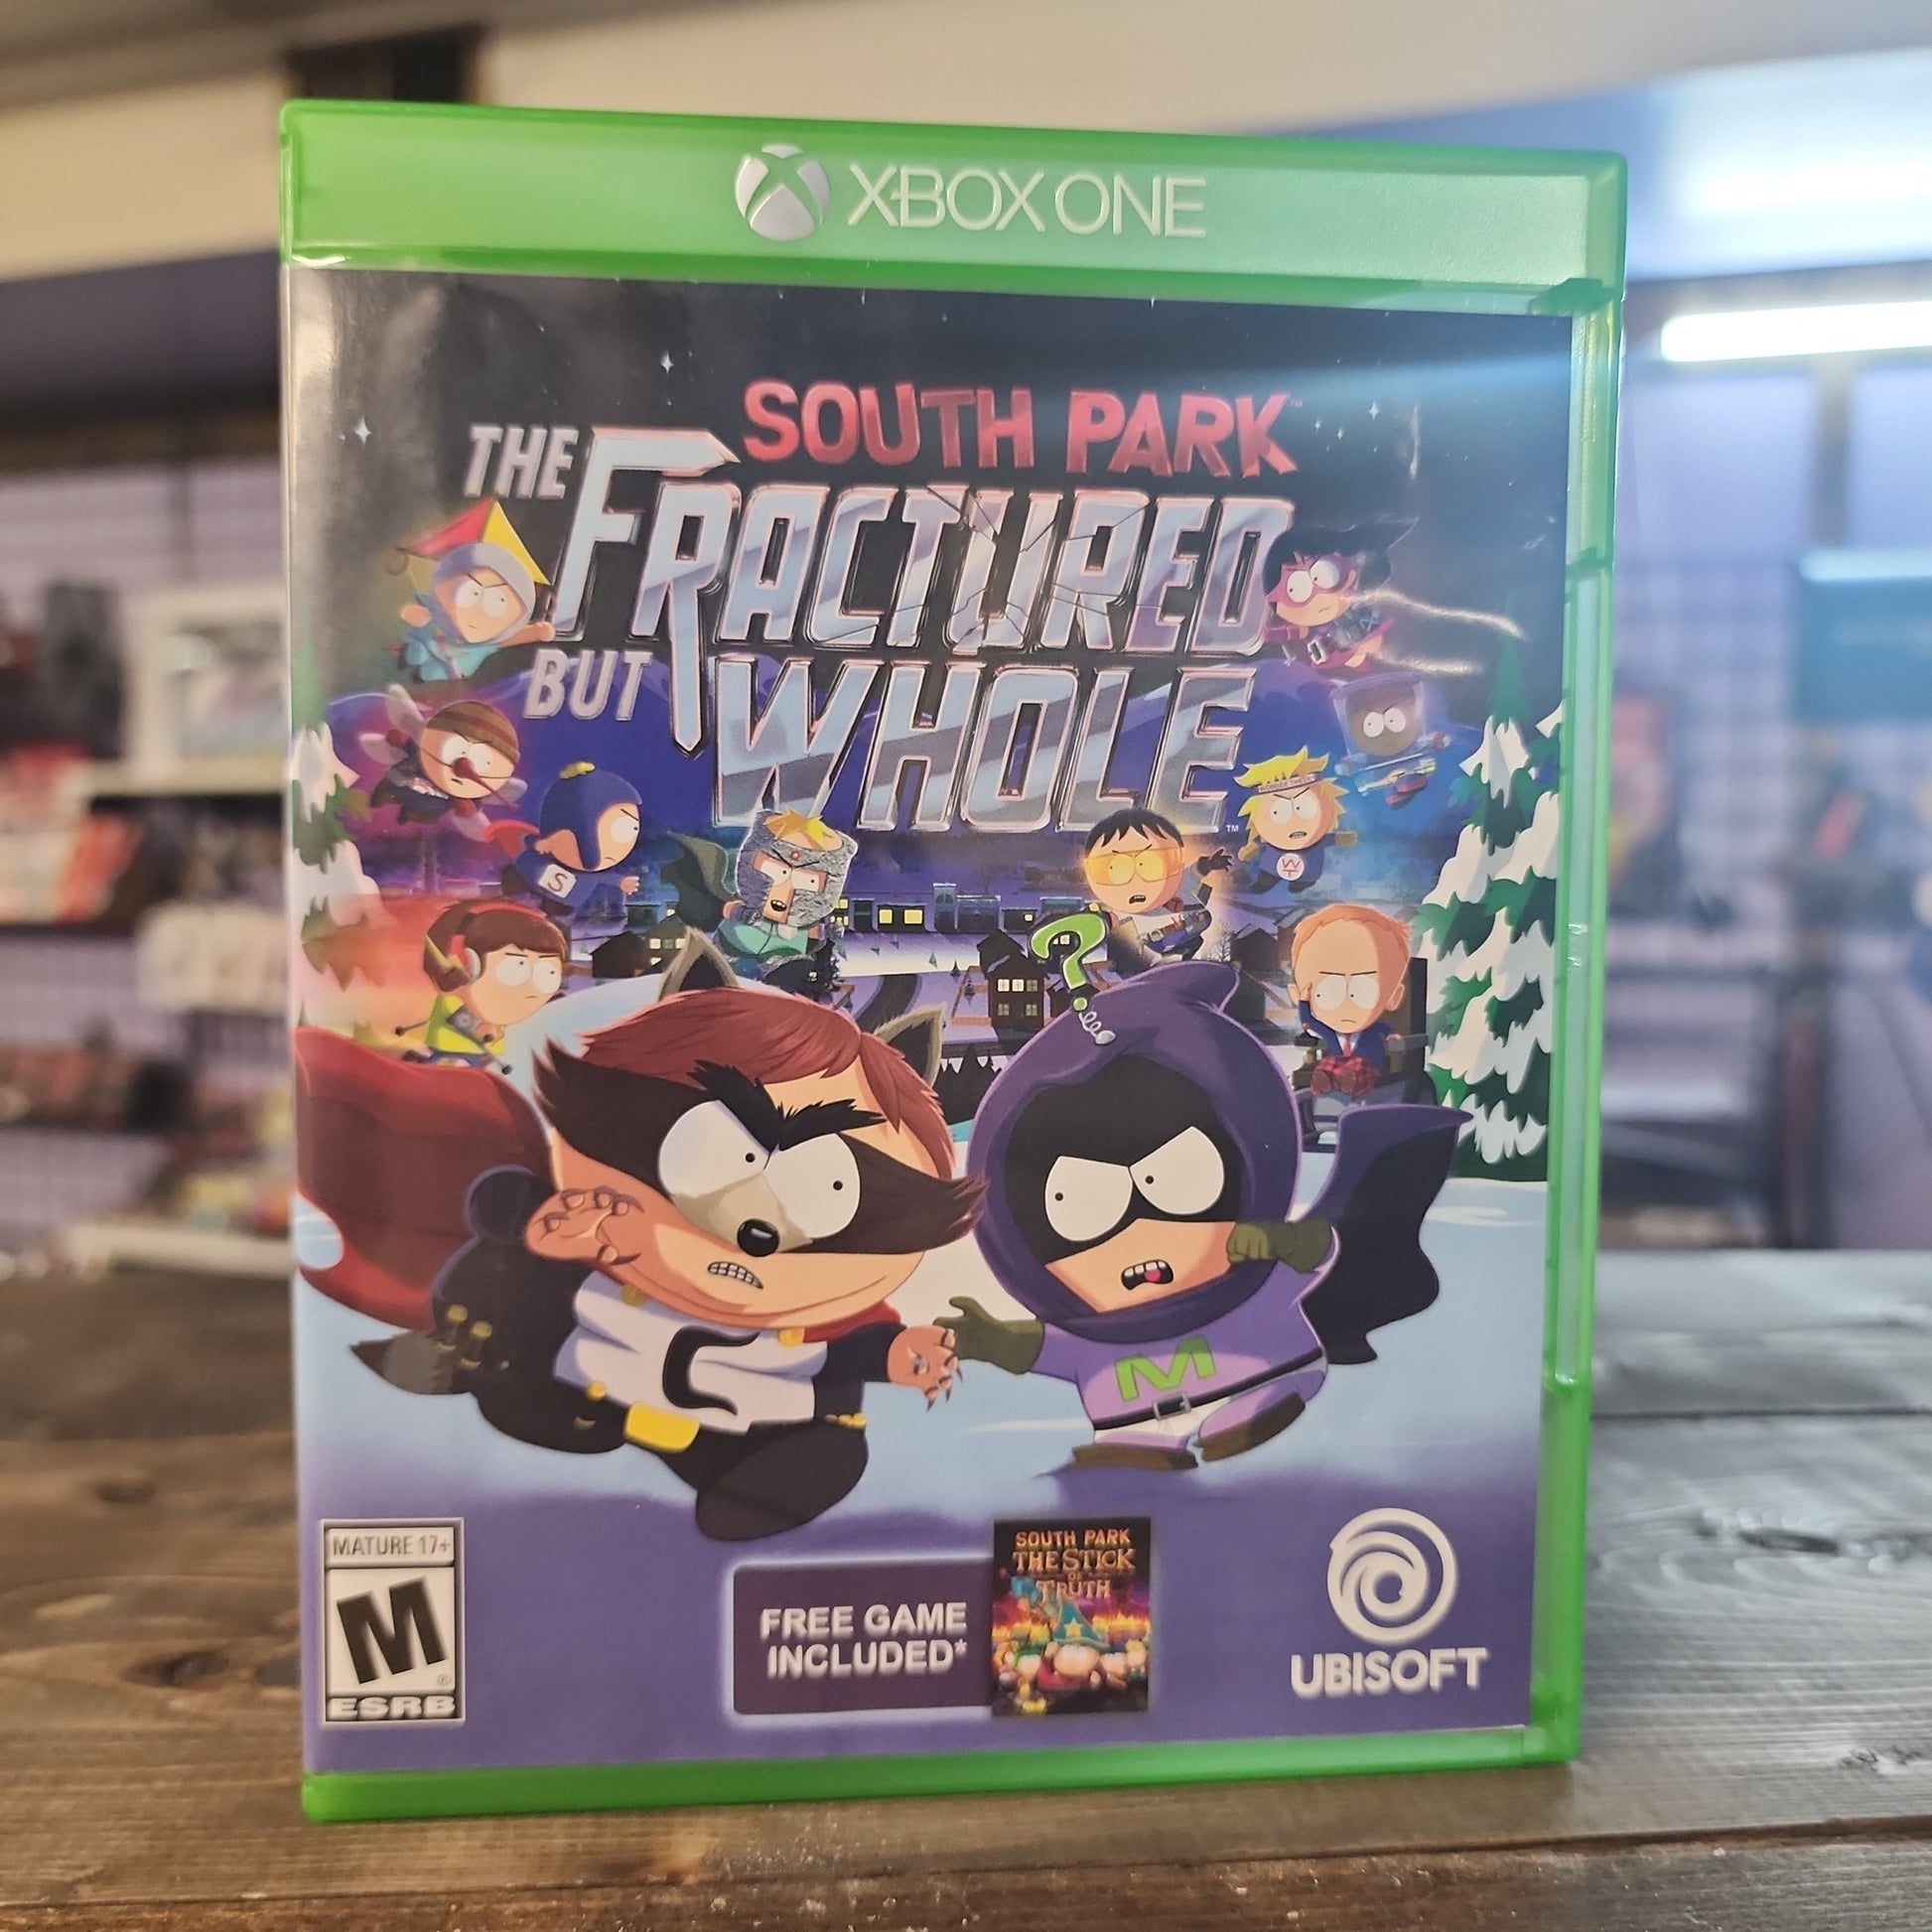 Xbox One - South Park: The Fractured but Whole Retrograde Collectibles CIB, Comedy, Dark Humor, Funny, Matt Stone, RPG, South Park, Superhero, Trey Parker, Ubisoft, Ubisof Preowned Video Game 